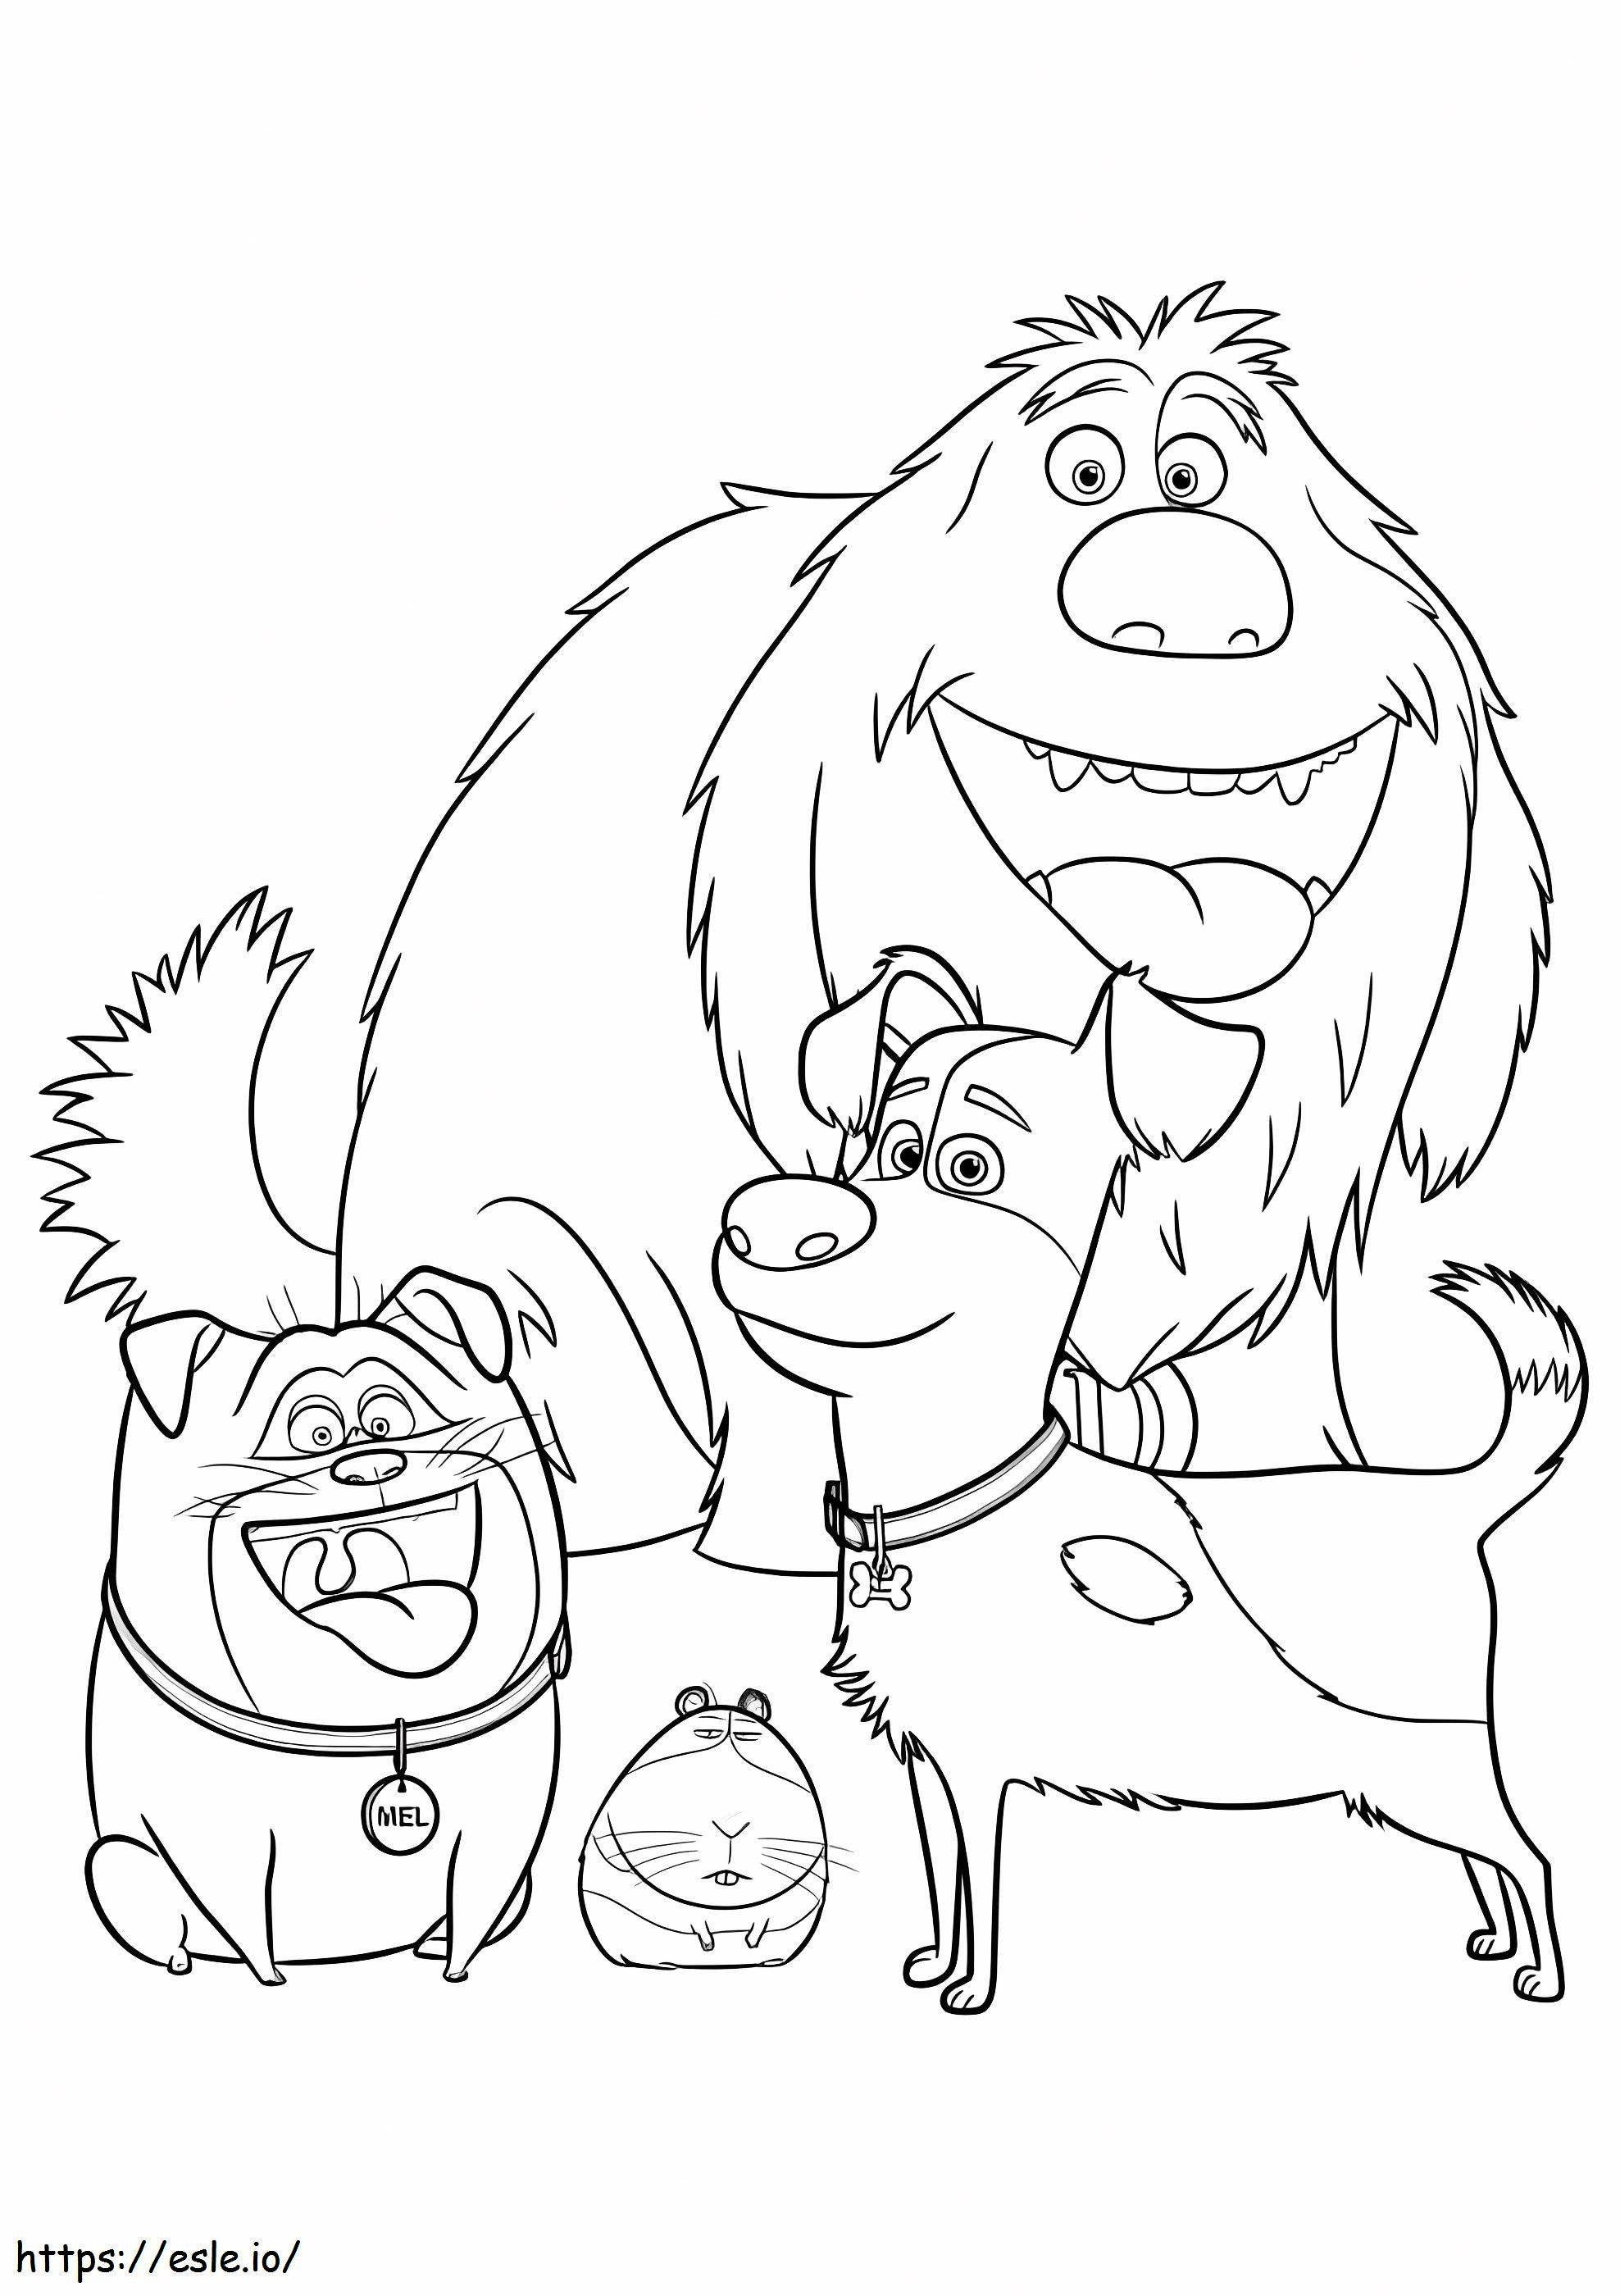 Duke And Friends coloring page